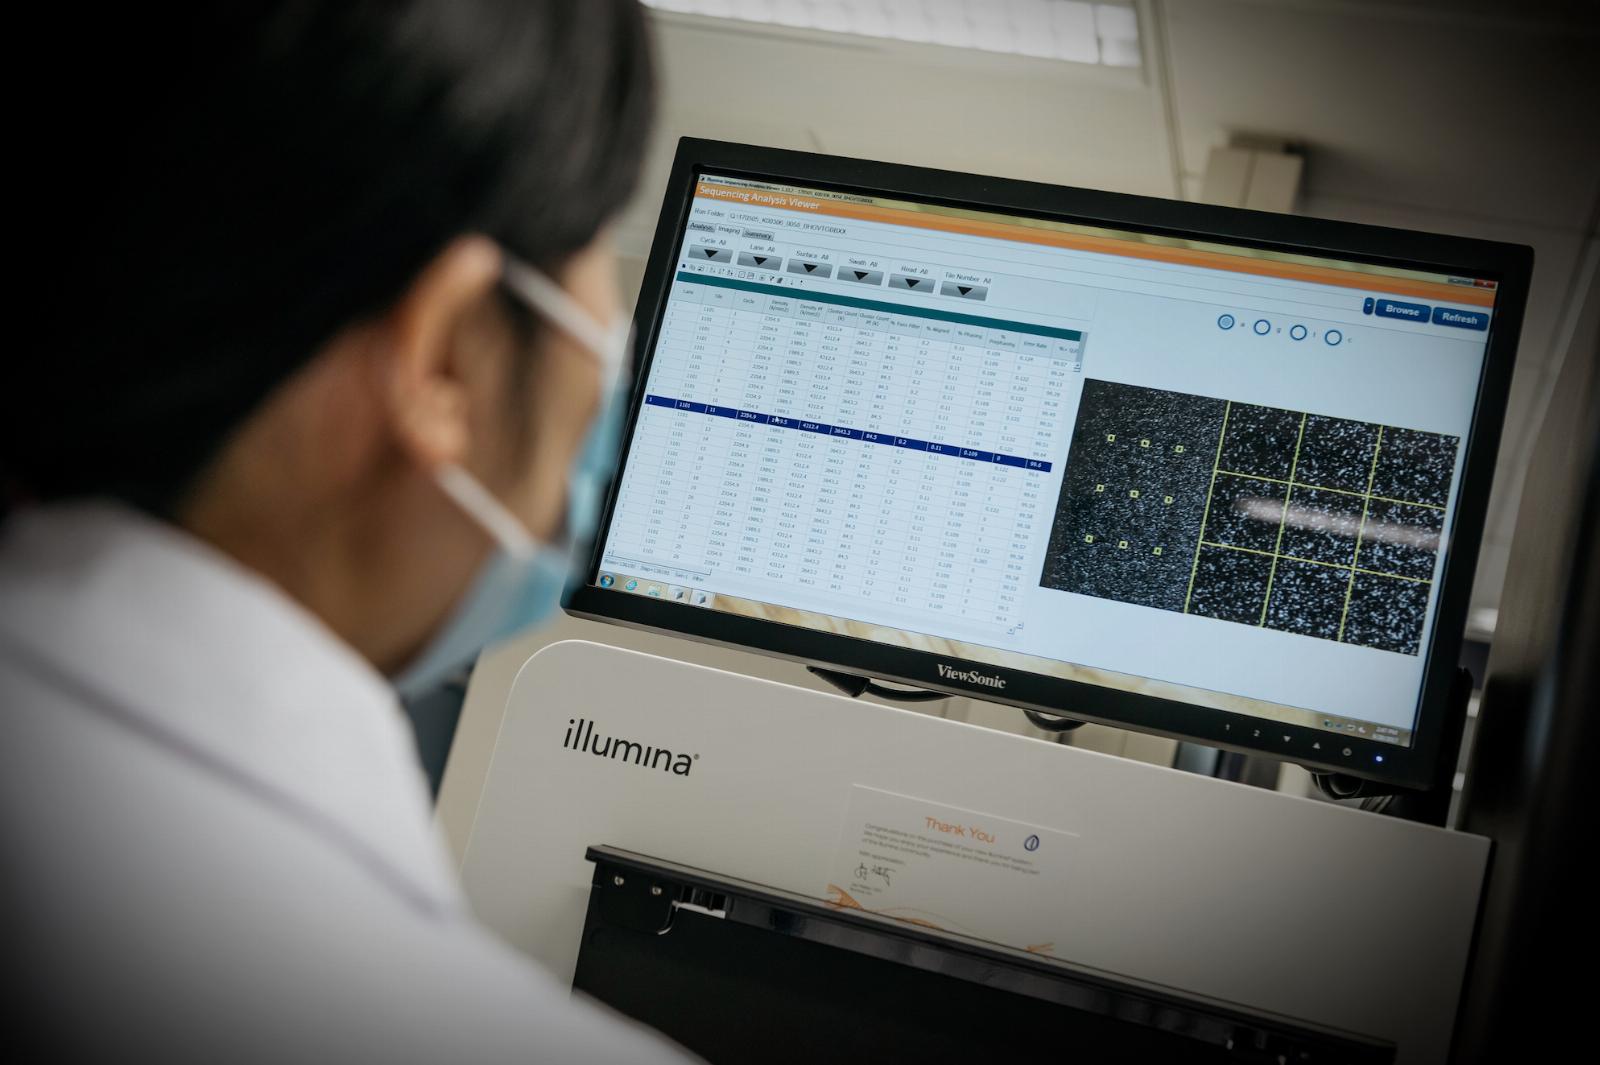 Critical-rated security flaw in Illumina DNA sequencing tech exposes patient data